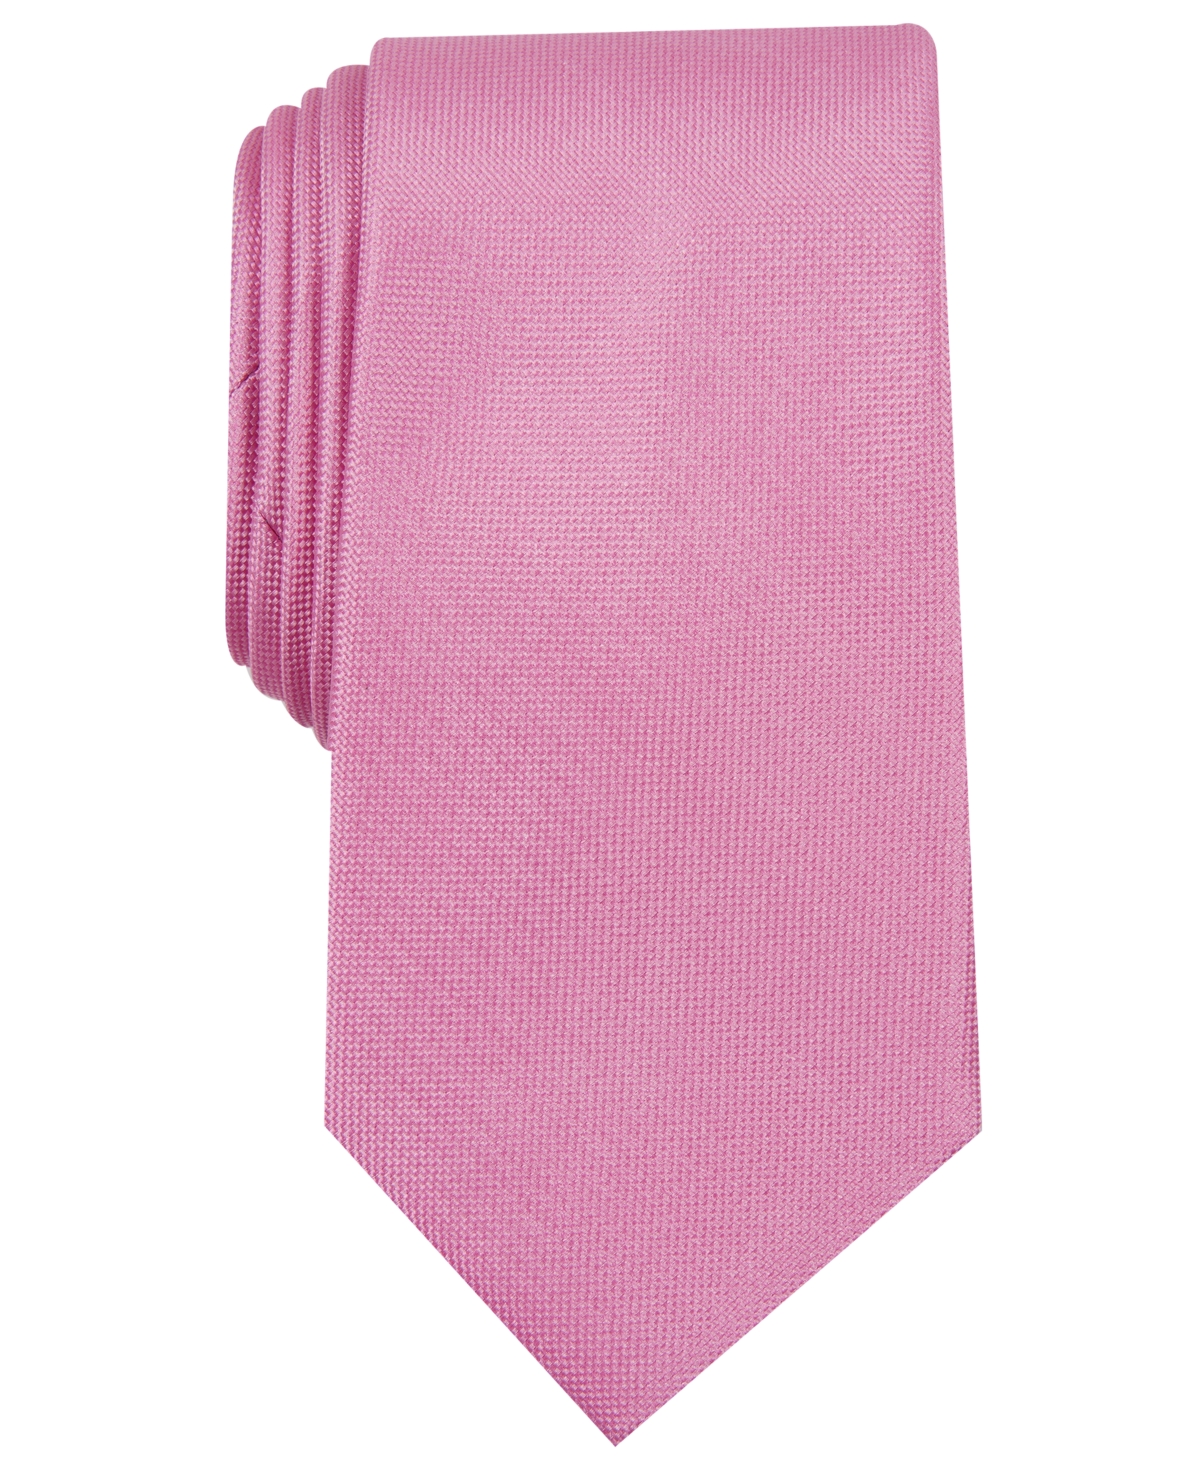 Men's Solid Tie, Created for Macy's - Kelly Green